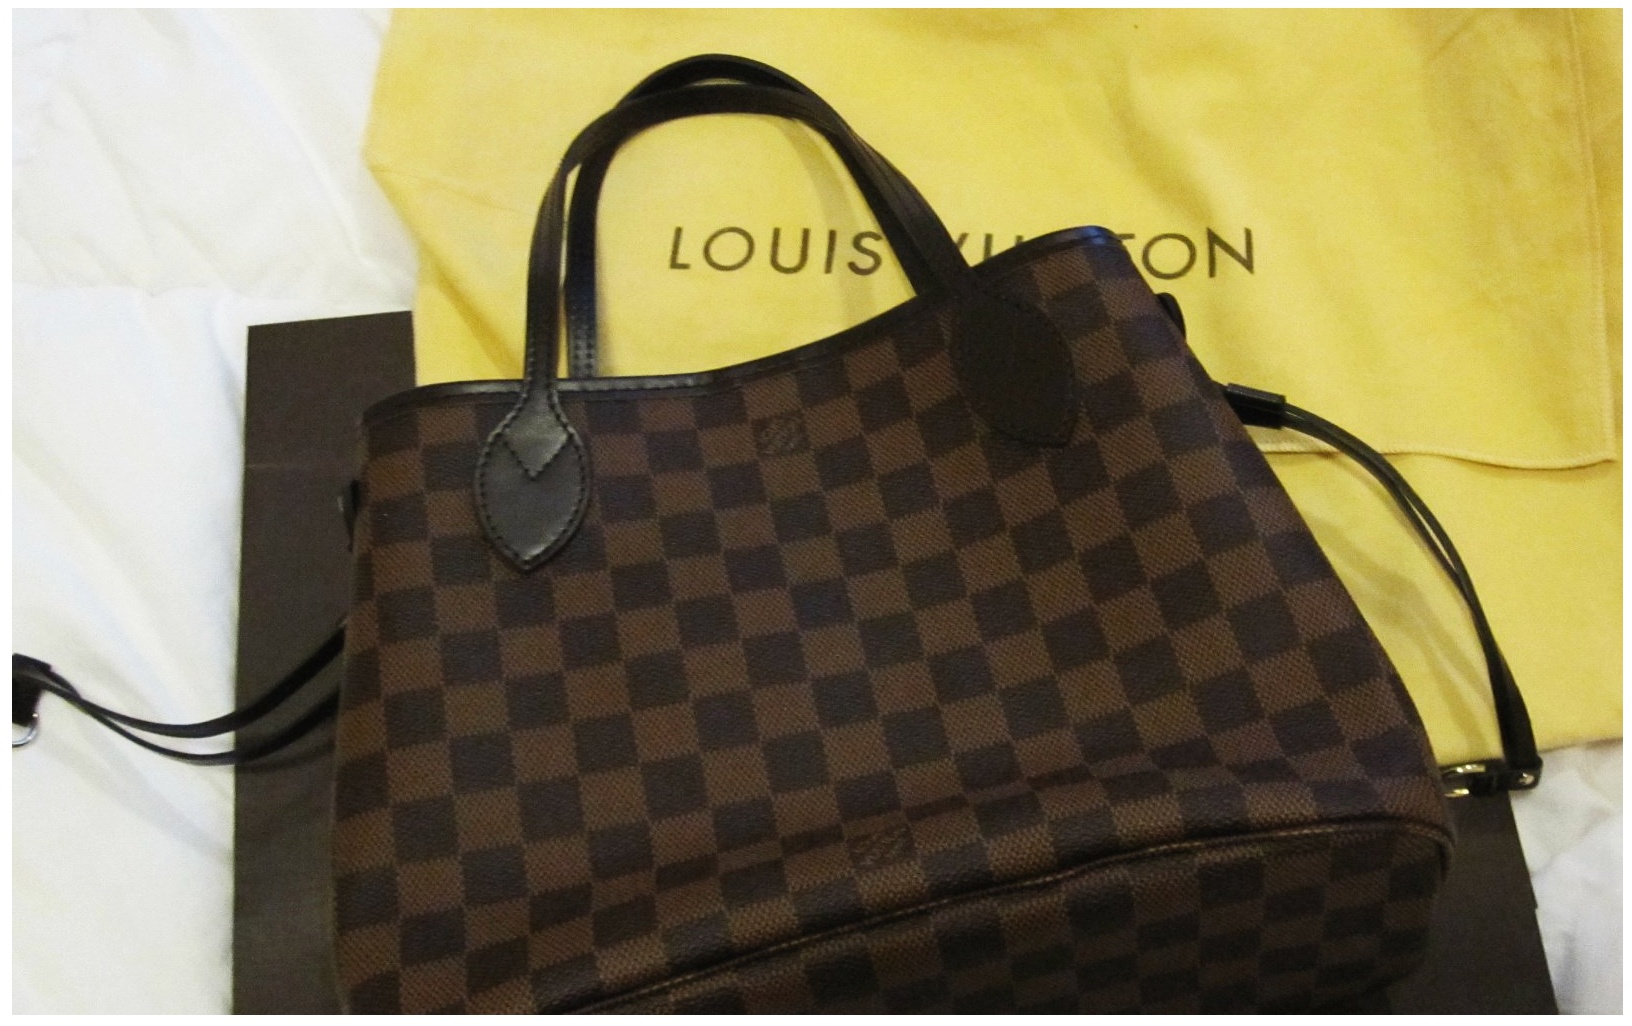 Received My First Lv Bag Today!